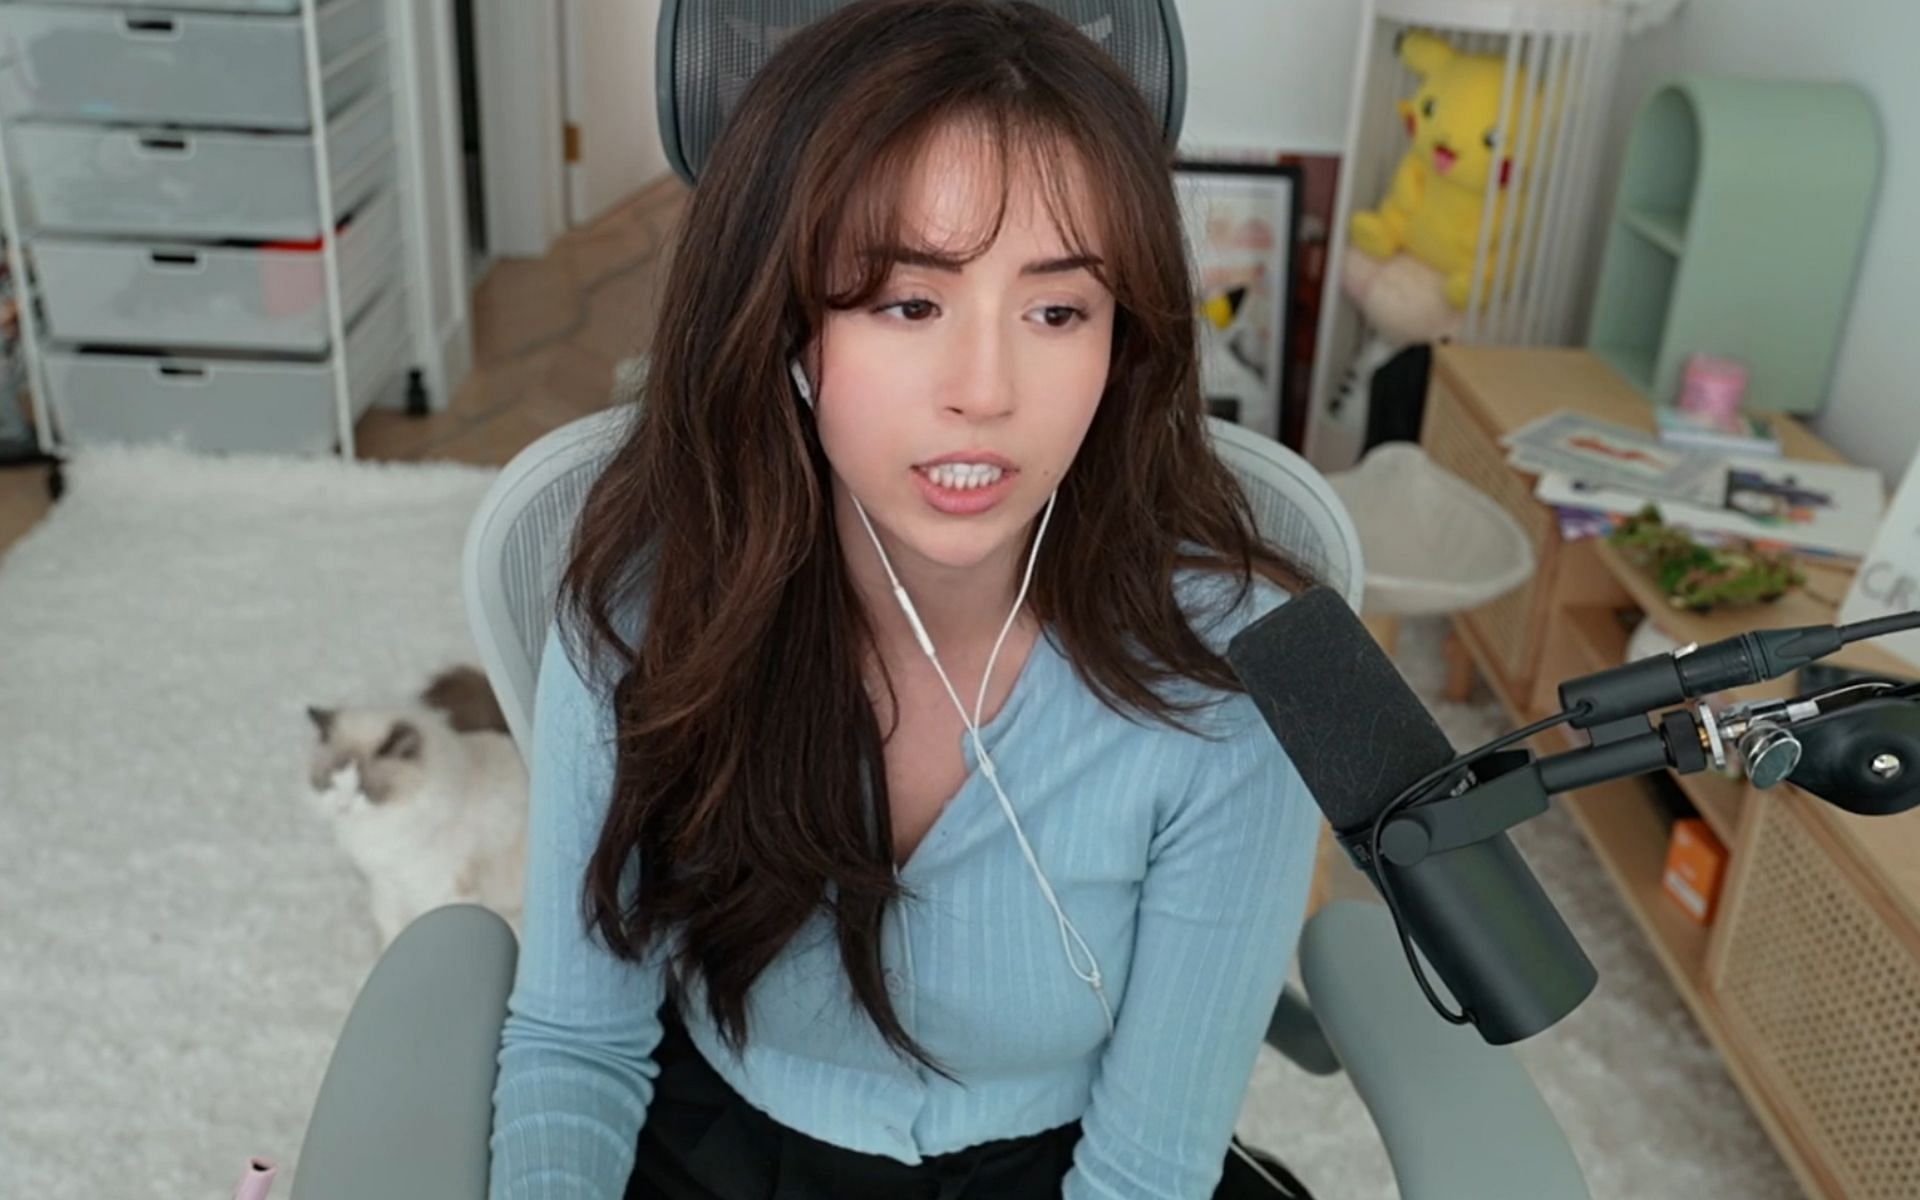 Pokimane lashes out at viewer over gambling on Twitch (Image via Pokimane/Twitch)